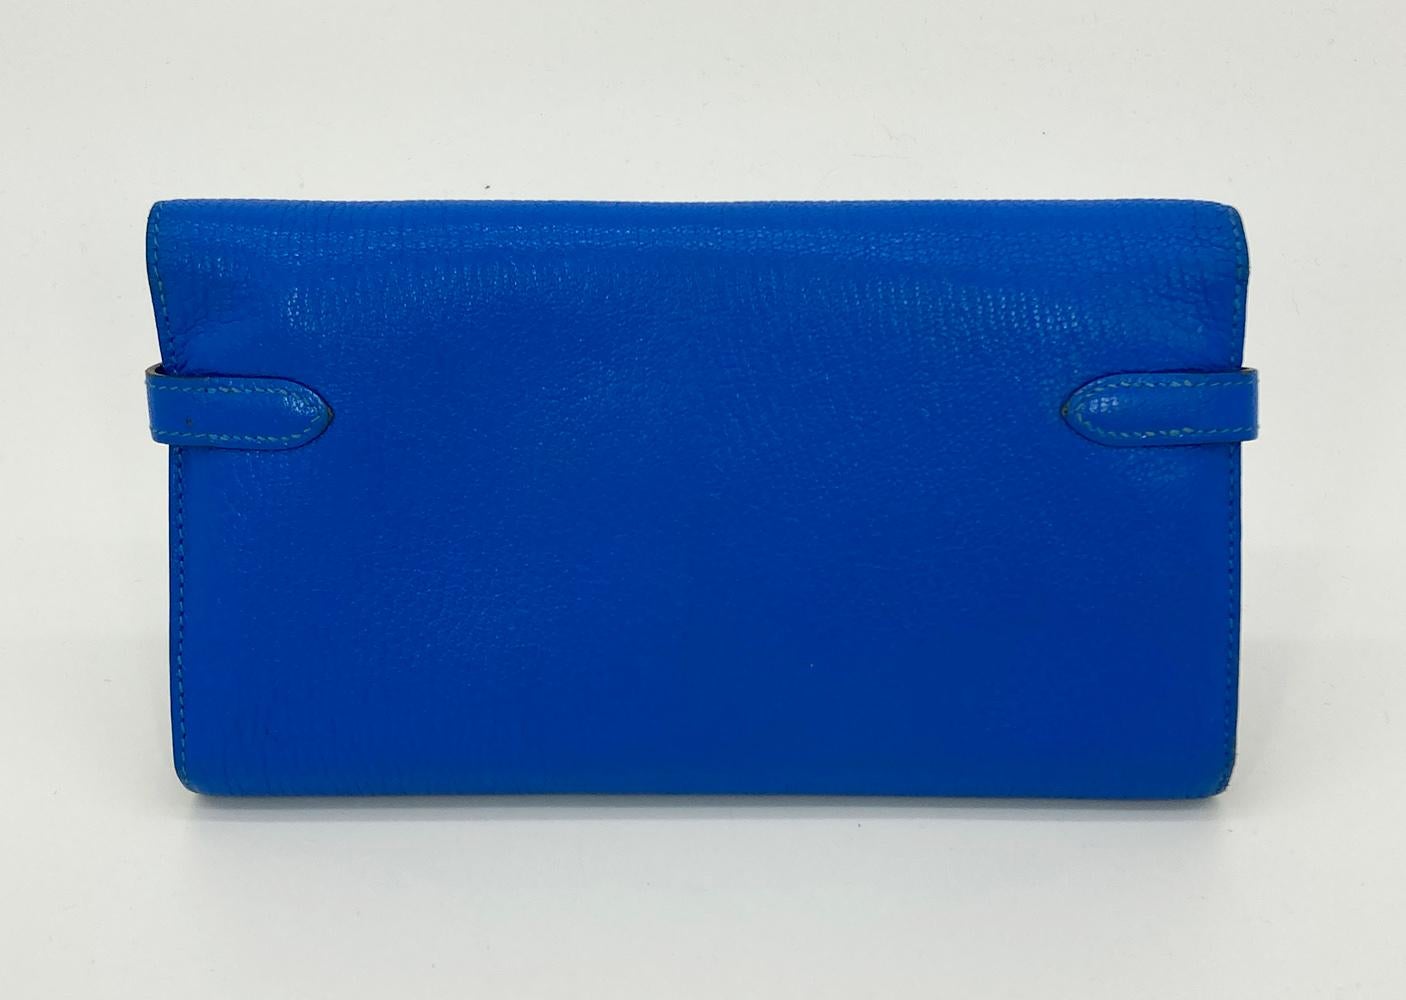 Hermes Kelly Classic Wallet Mysore Bleu Electrique in excellent condition. Bright blue electrique mysore leather exterior trimmed with silver palladium hardware. Signature kelly twist double strap closure opens to a matching blue leather interior